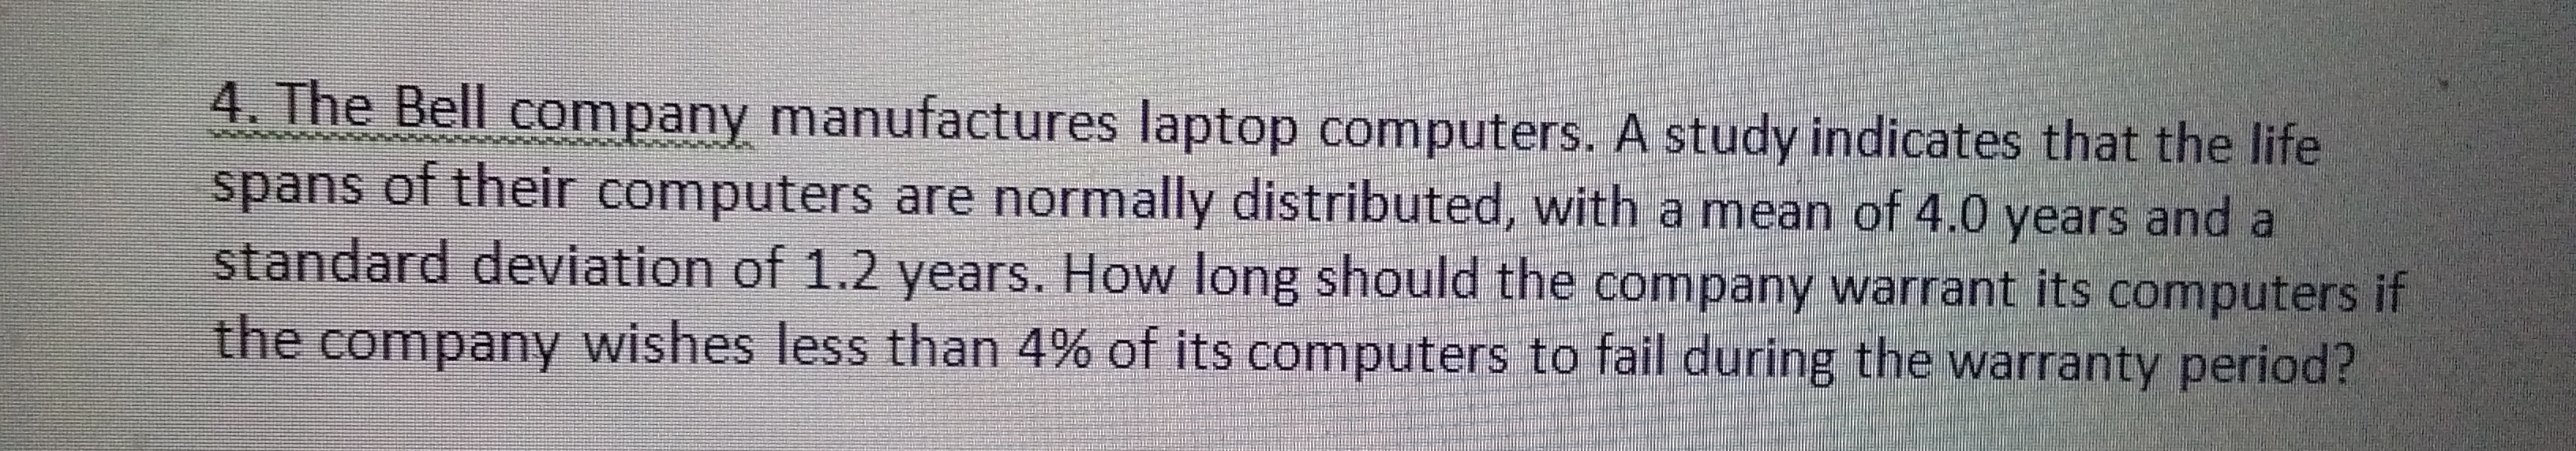 4. The Bell company manufactures laptop computers. A study indicates that the life
spans of their computers are normally distributed, with a mean of 4.0 years and a
standard deviation of 1.2 years. How long should the company warrant its computers if
the company wishes less than 4% of its computers to fail during the warranty period?
